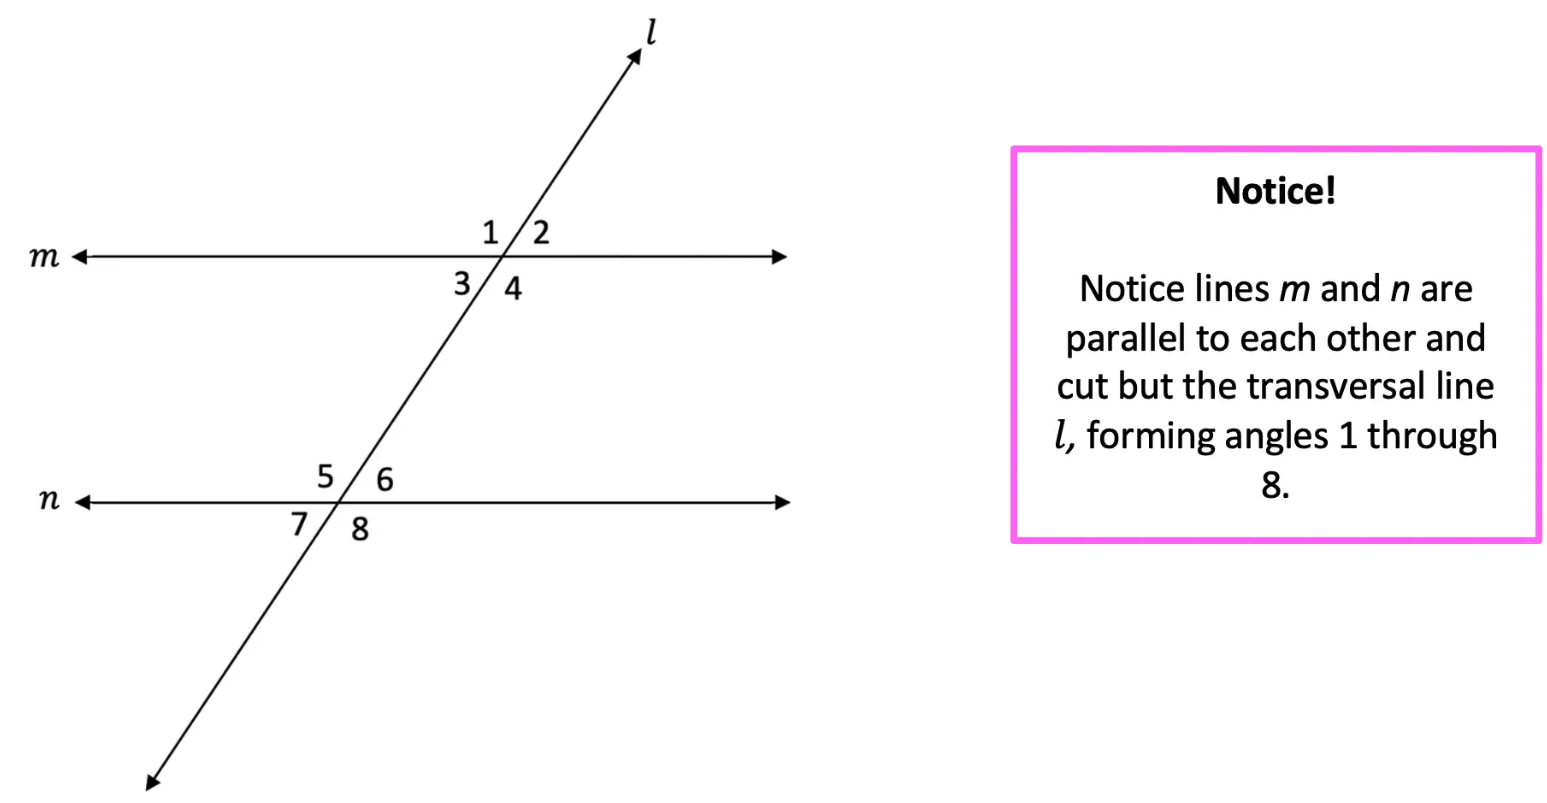 Diagram Shows Lines That Must be Parallel Lines Cut by a Transversal